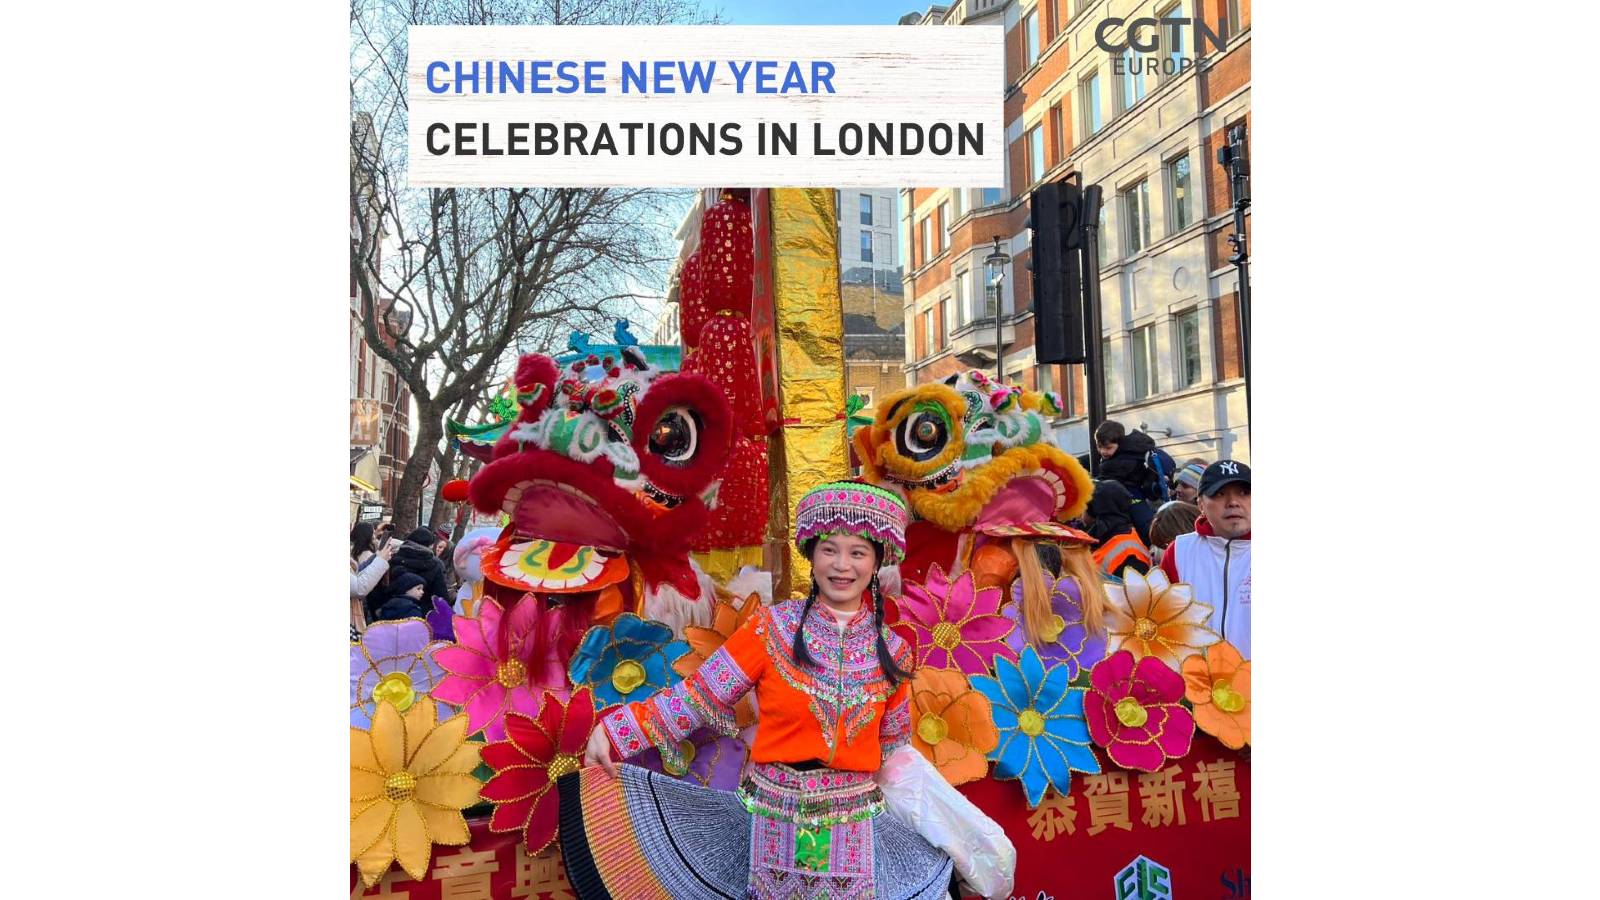 Traditional Chinese lion puppets are an important part of the London parade. /LCCA